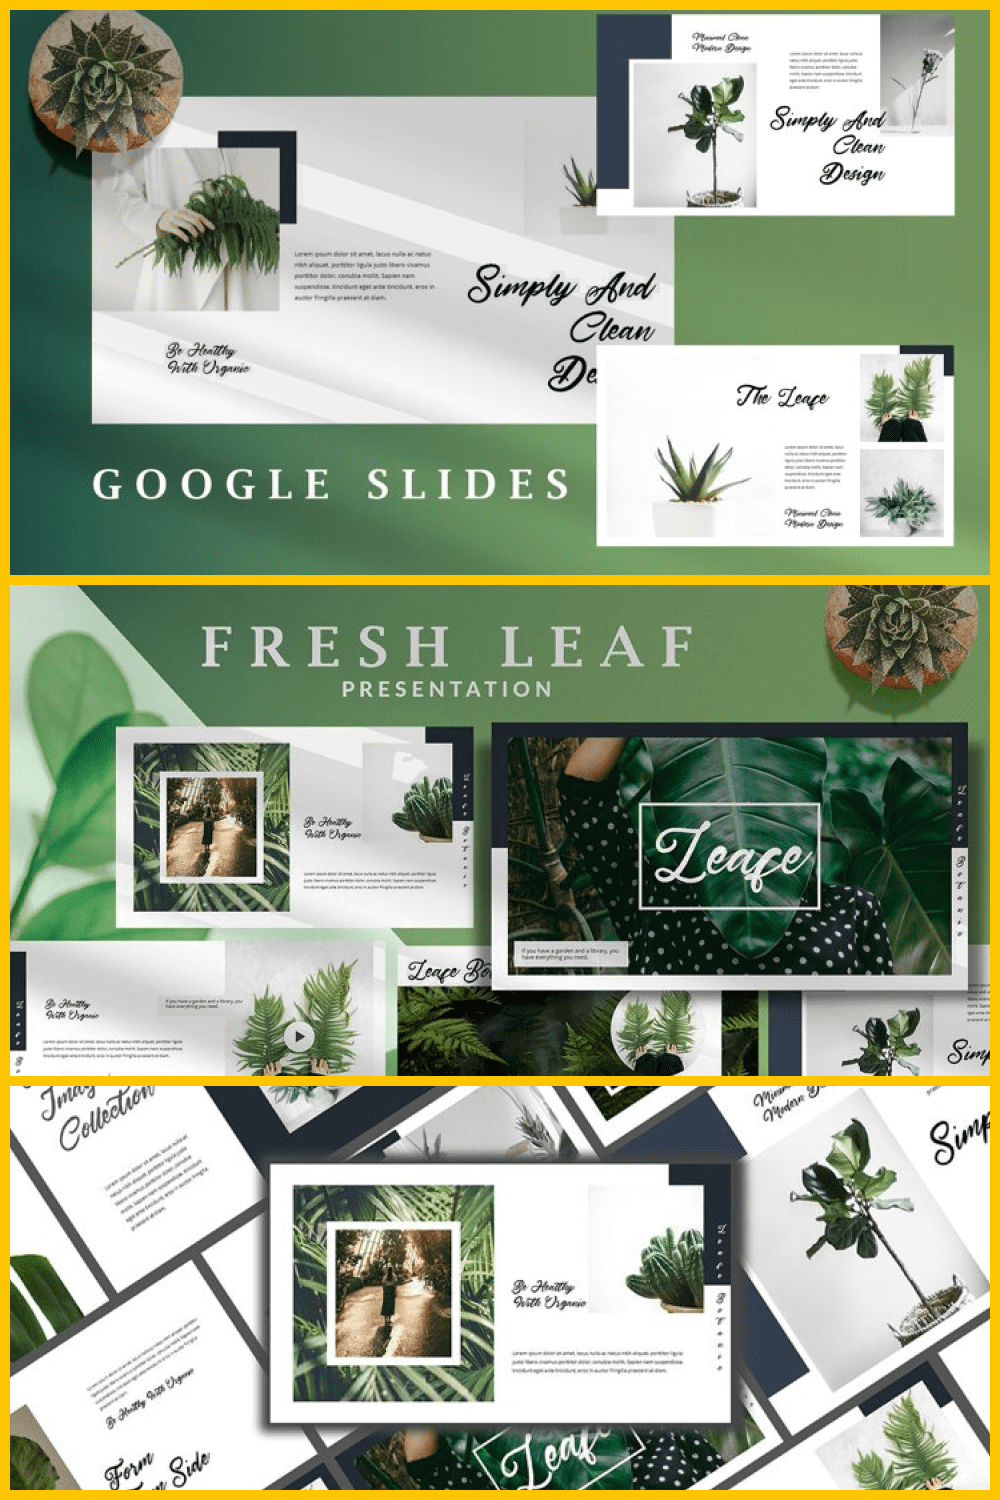 Deep warm green with interesting shapes for images.